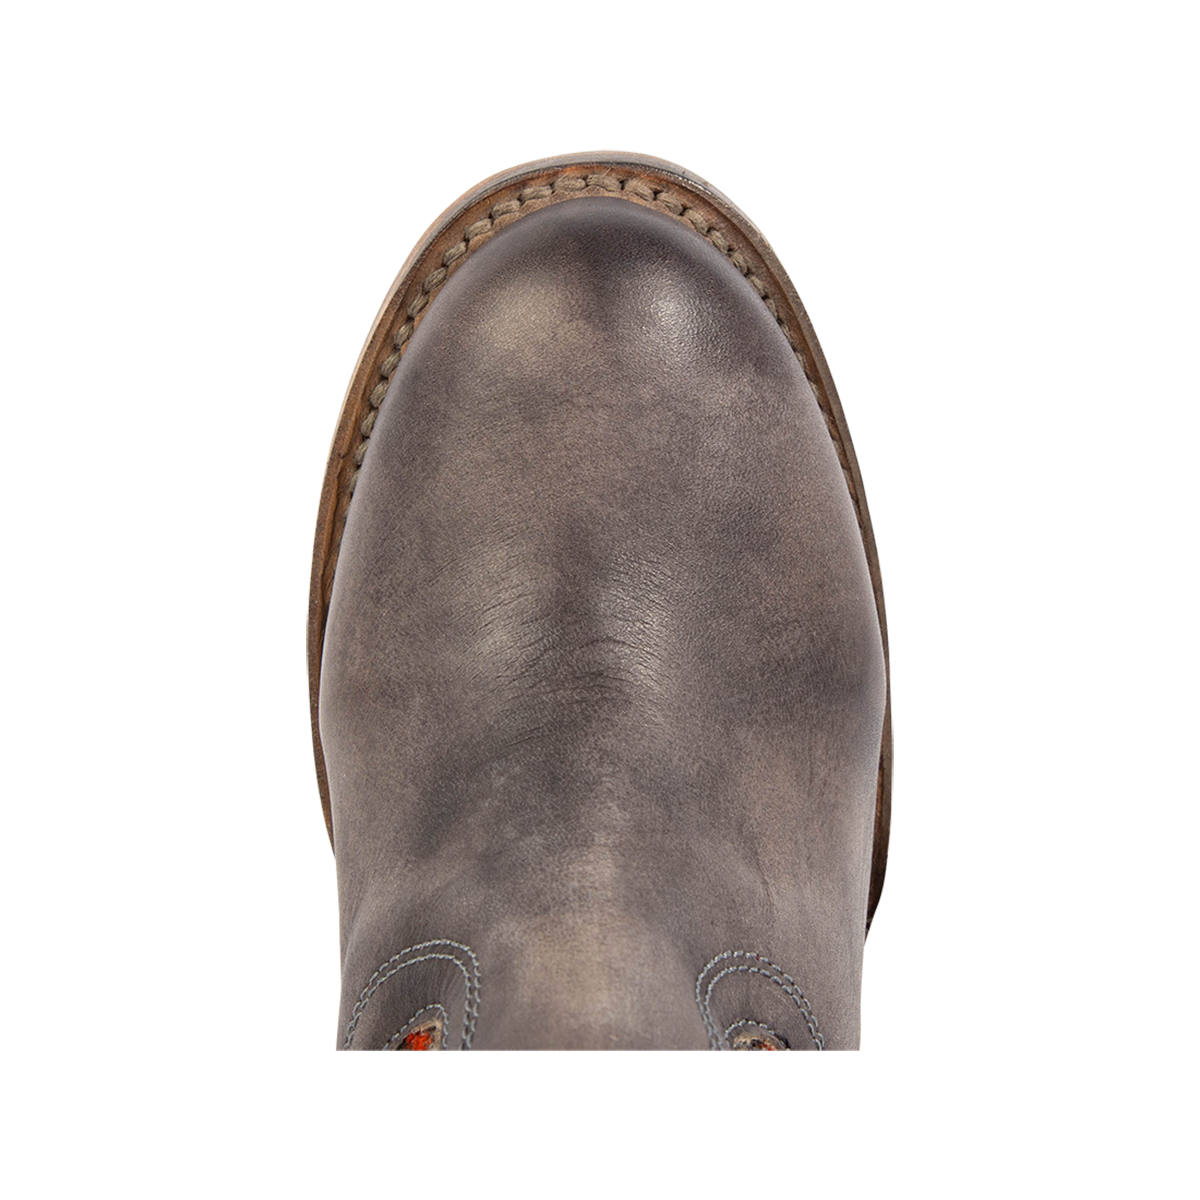 Top view showing a rounded toe and Goodyear welt on FREEBIRD women's Songbird stone leather bootie